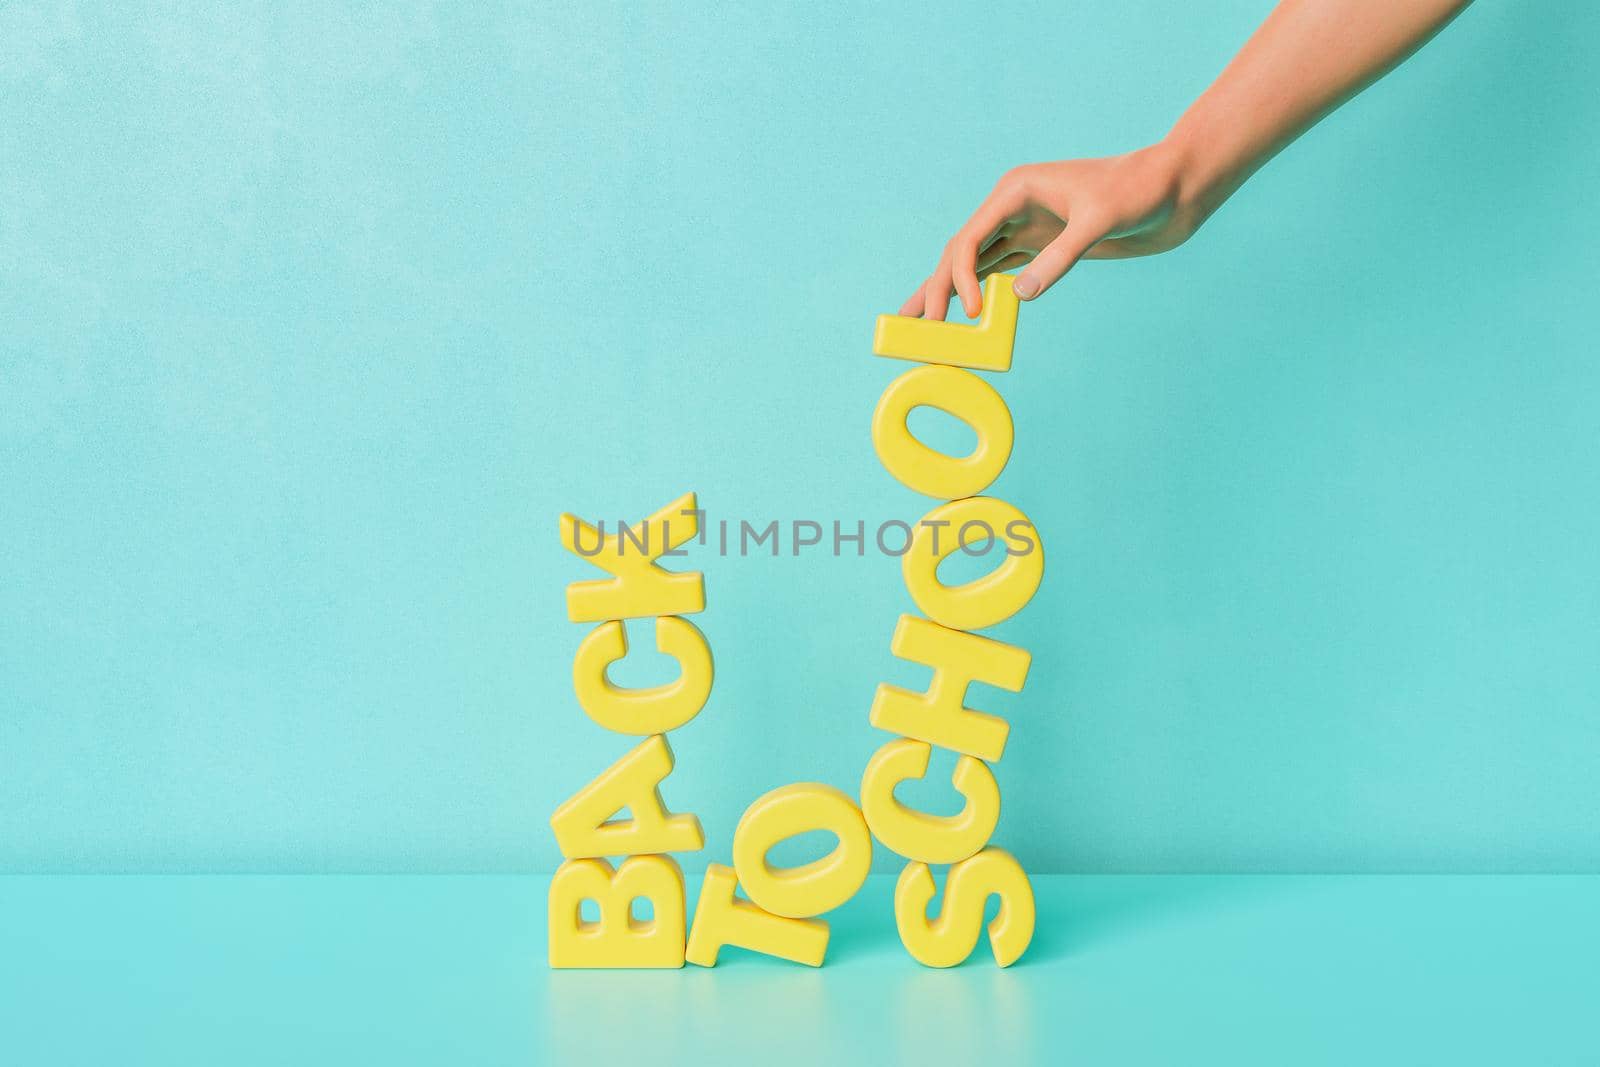 3D rendering of crop unrecognizable person creating Back To School text with yellow letters against blue background